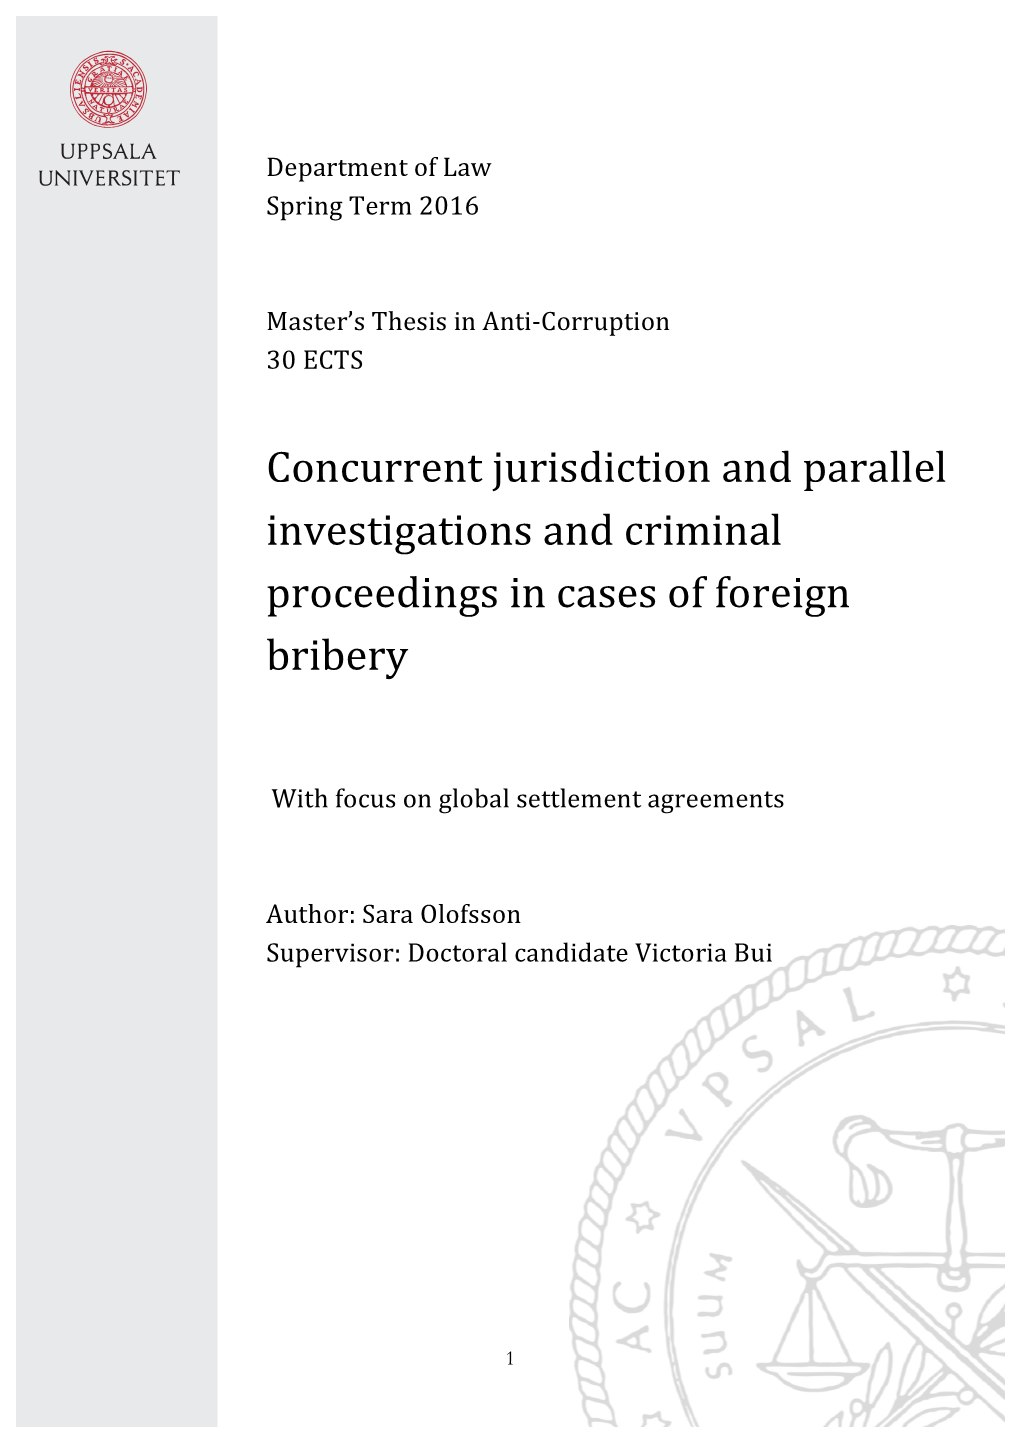 Concurrent Jurisdiction and Parallel Investigations and Criminal Proceedings in Cases of Foreign Bribery